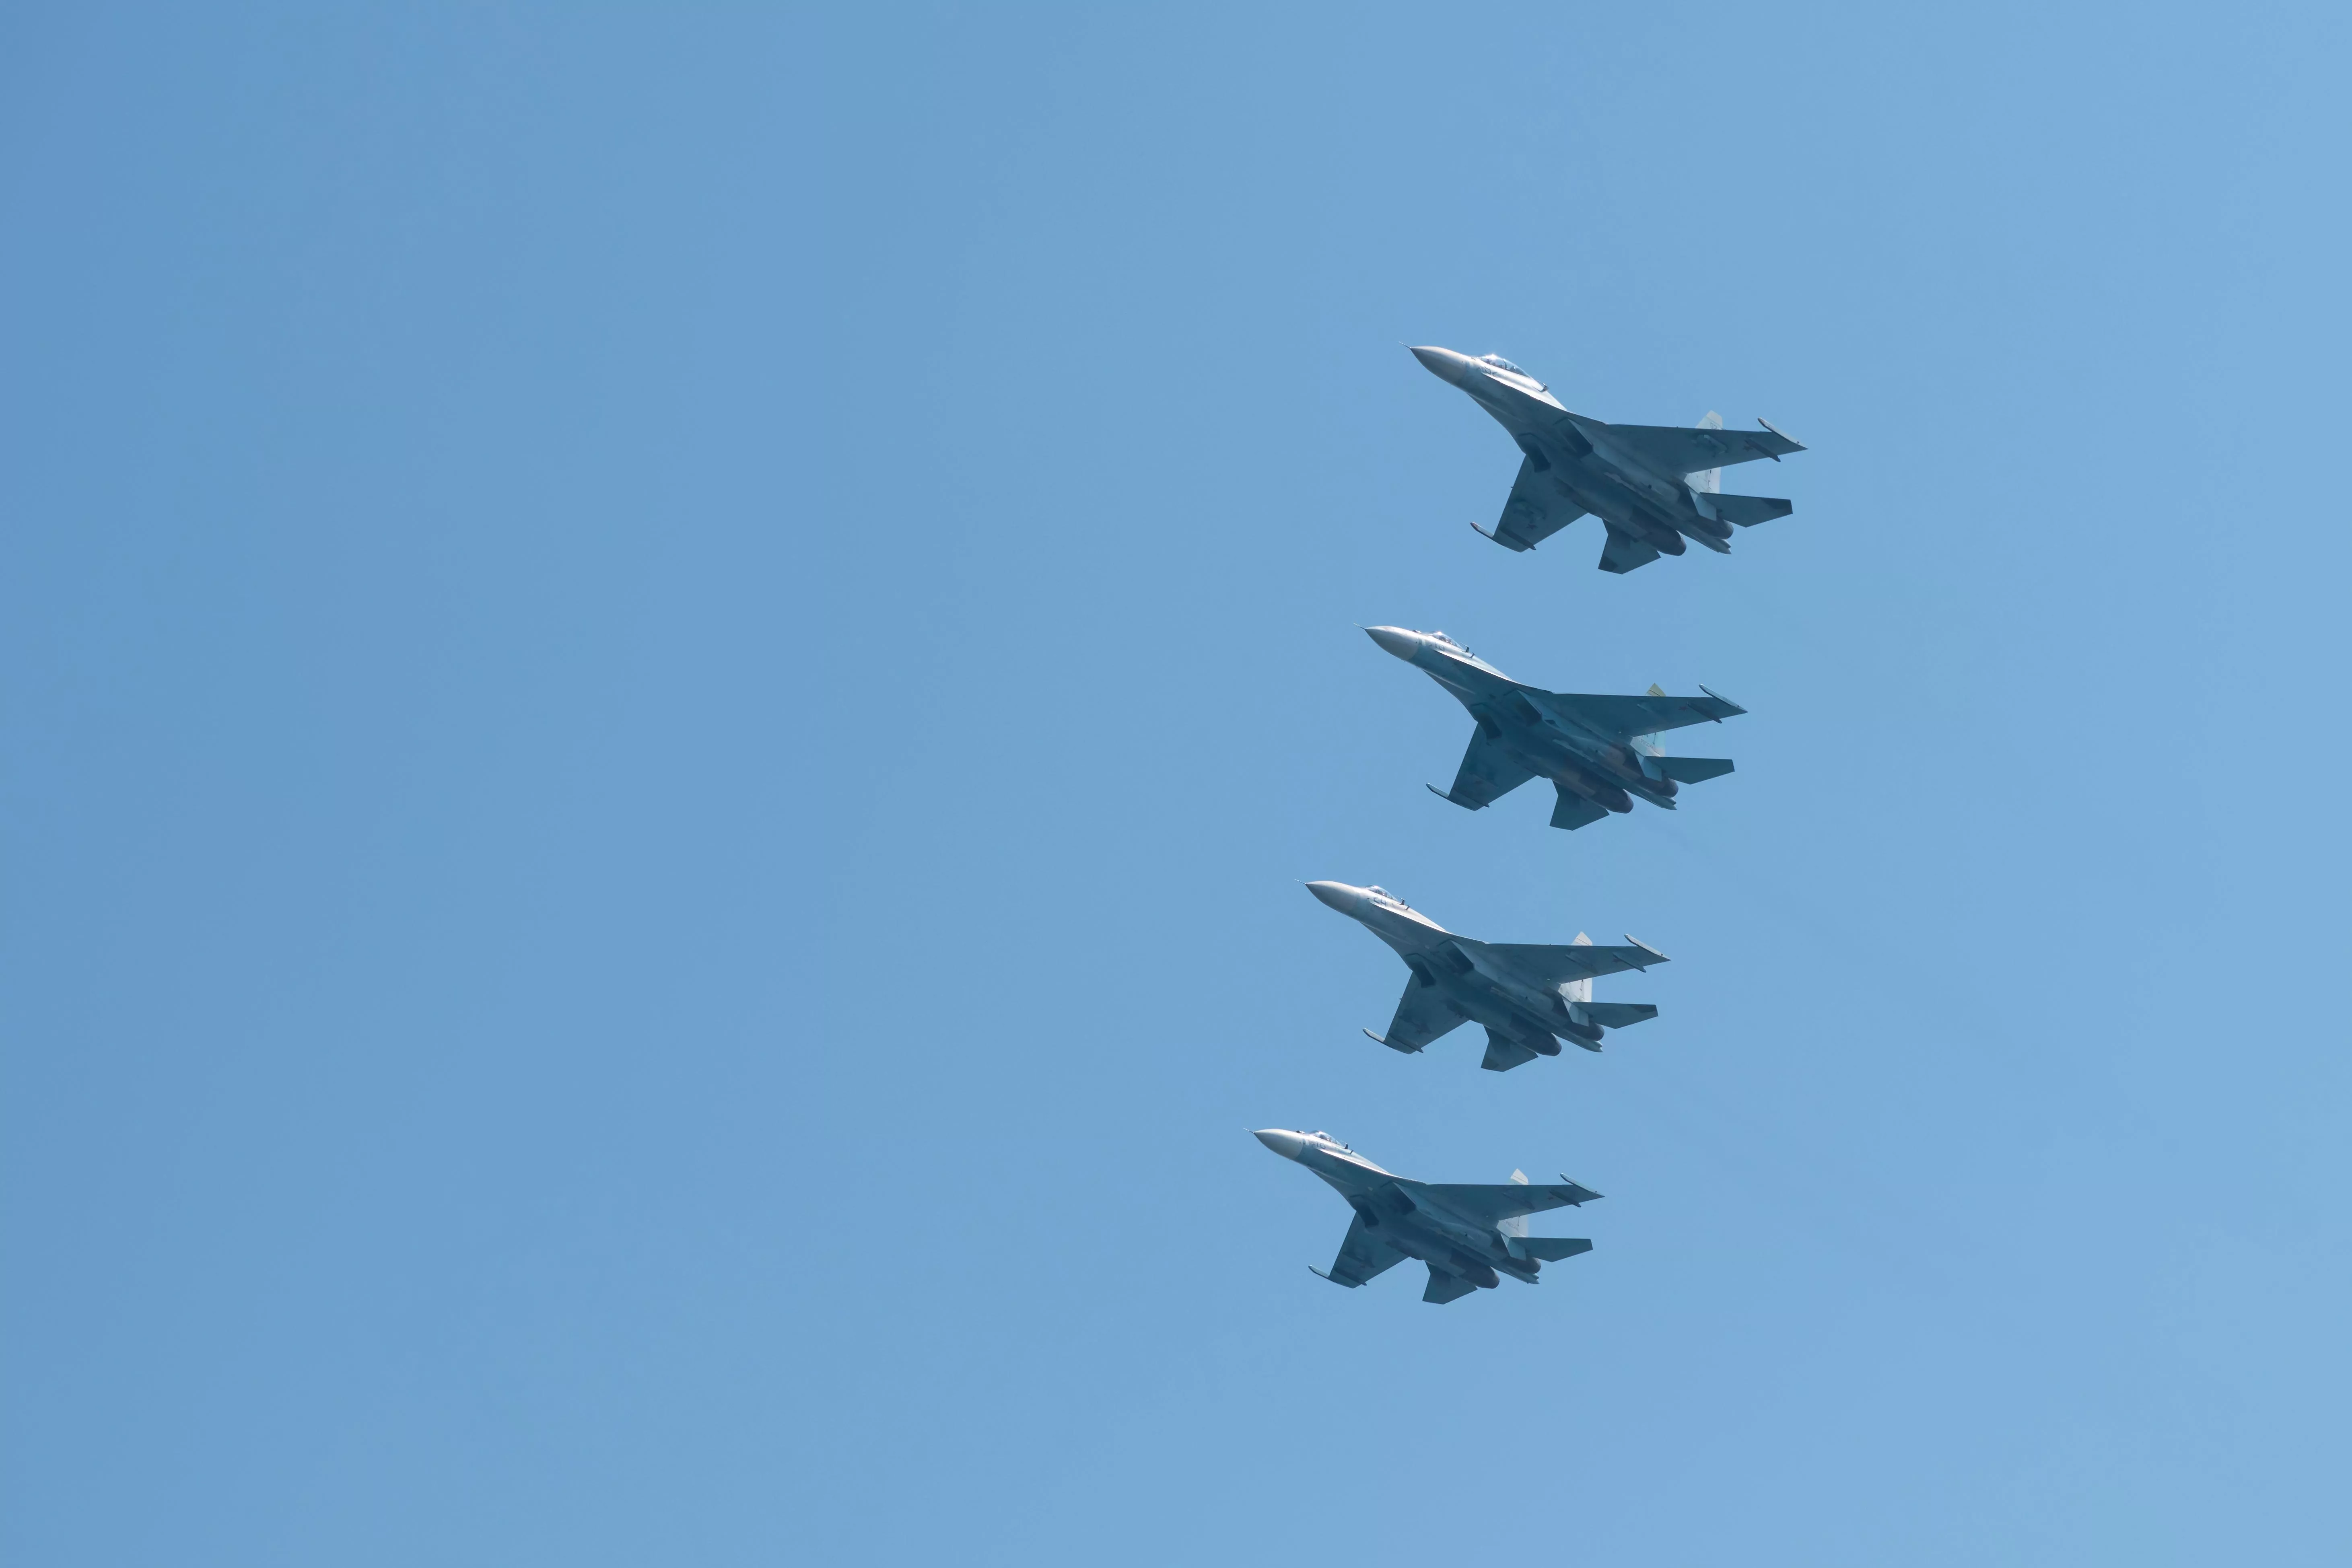 Group of supersonic fighter aircrafts Sukhoi Su-27 (NATO reporting name Flanker) flies in the sky in diagonal formation.